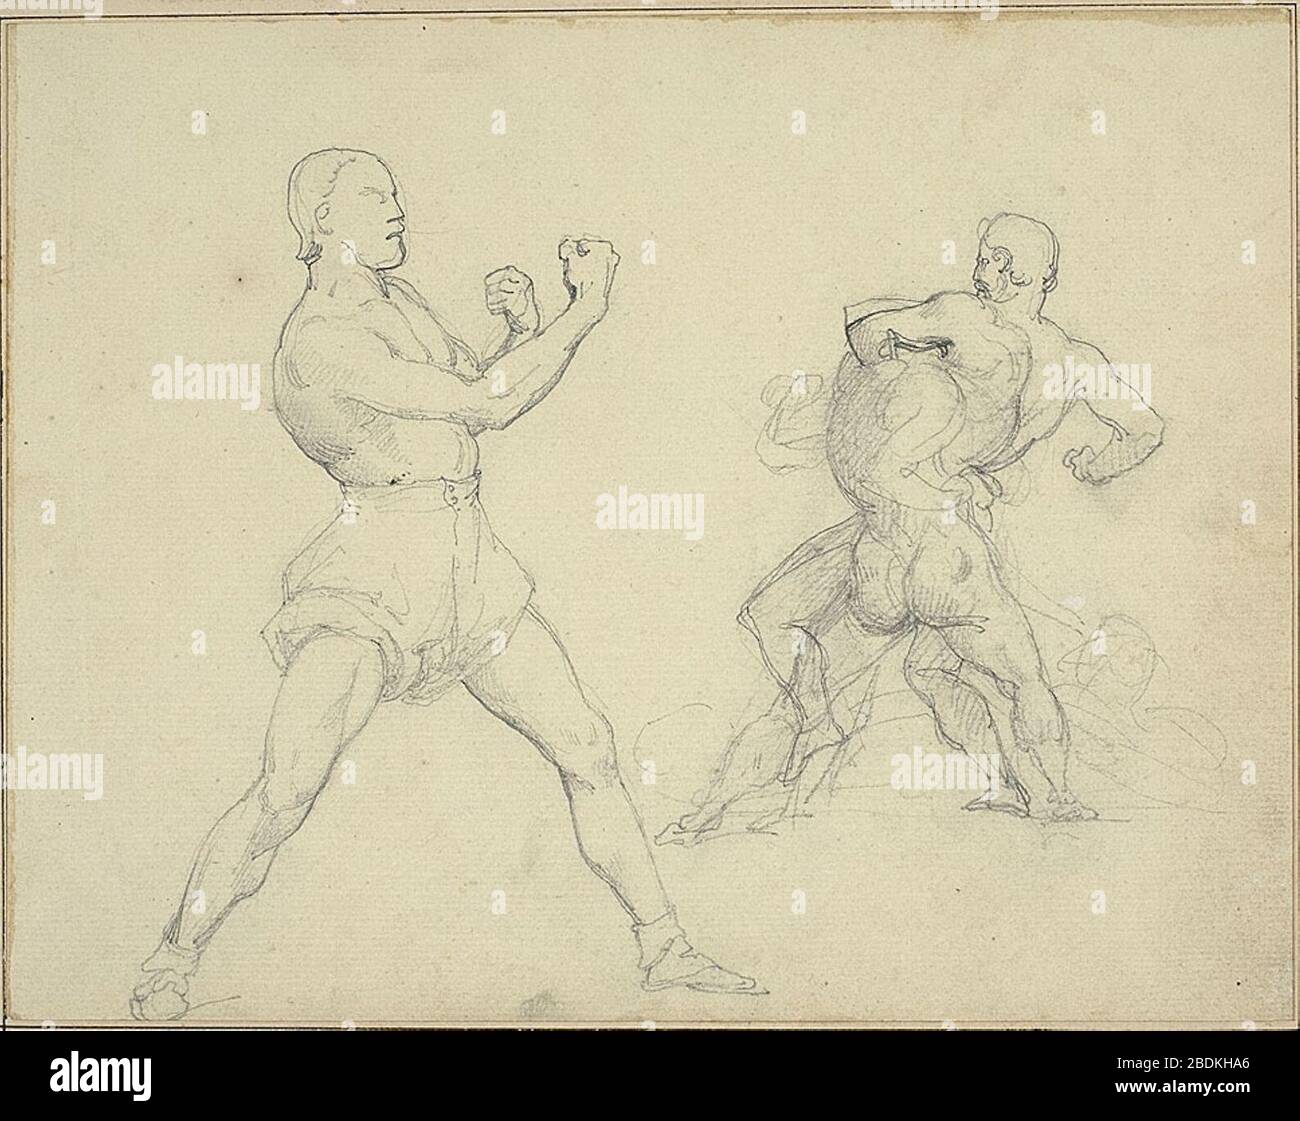 Géricault - Boxer Facing Right and Two Men Wrestling, 1818-1819. Stock Photo